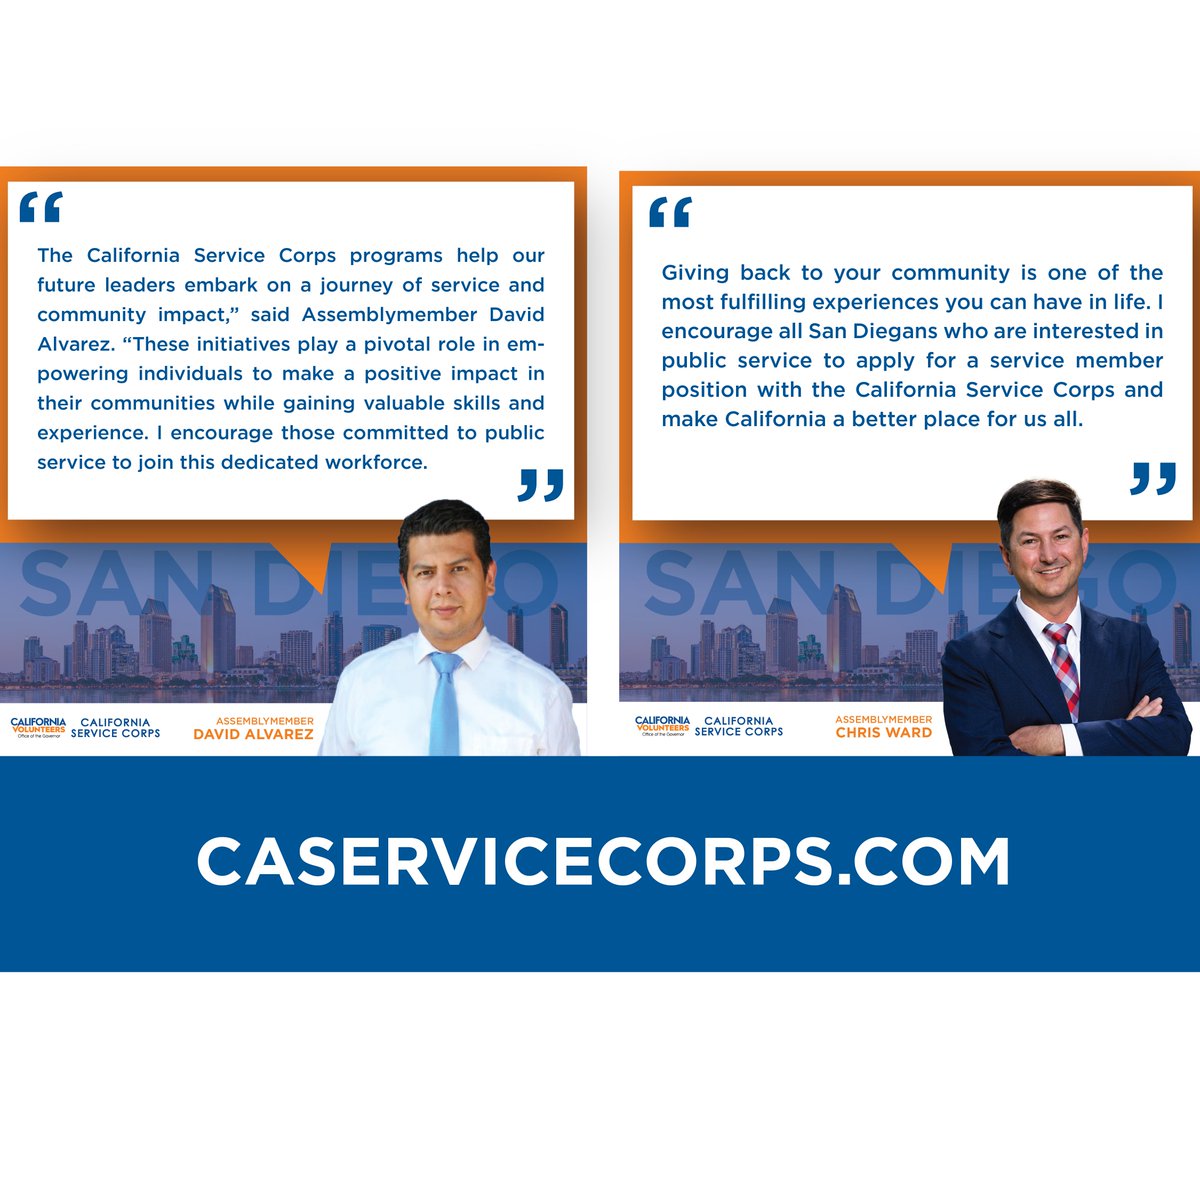 Join San Diego's movement! 🎉 Leaders back the California Service Corps recruitment. Get paid, make a difference, seize economic opportunities. ➡️ Apply at CAServiceCorps.com. Don't miss out!